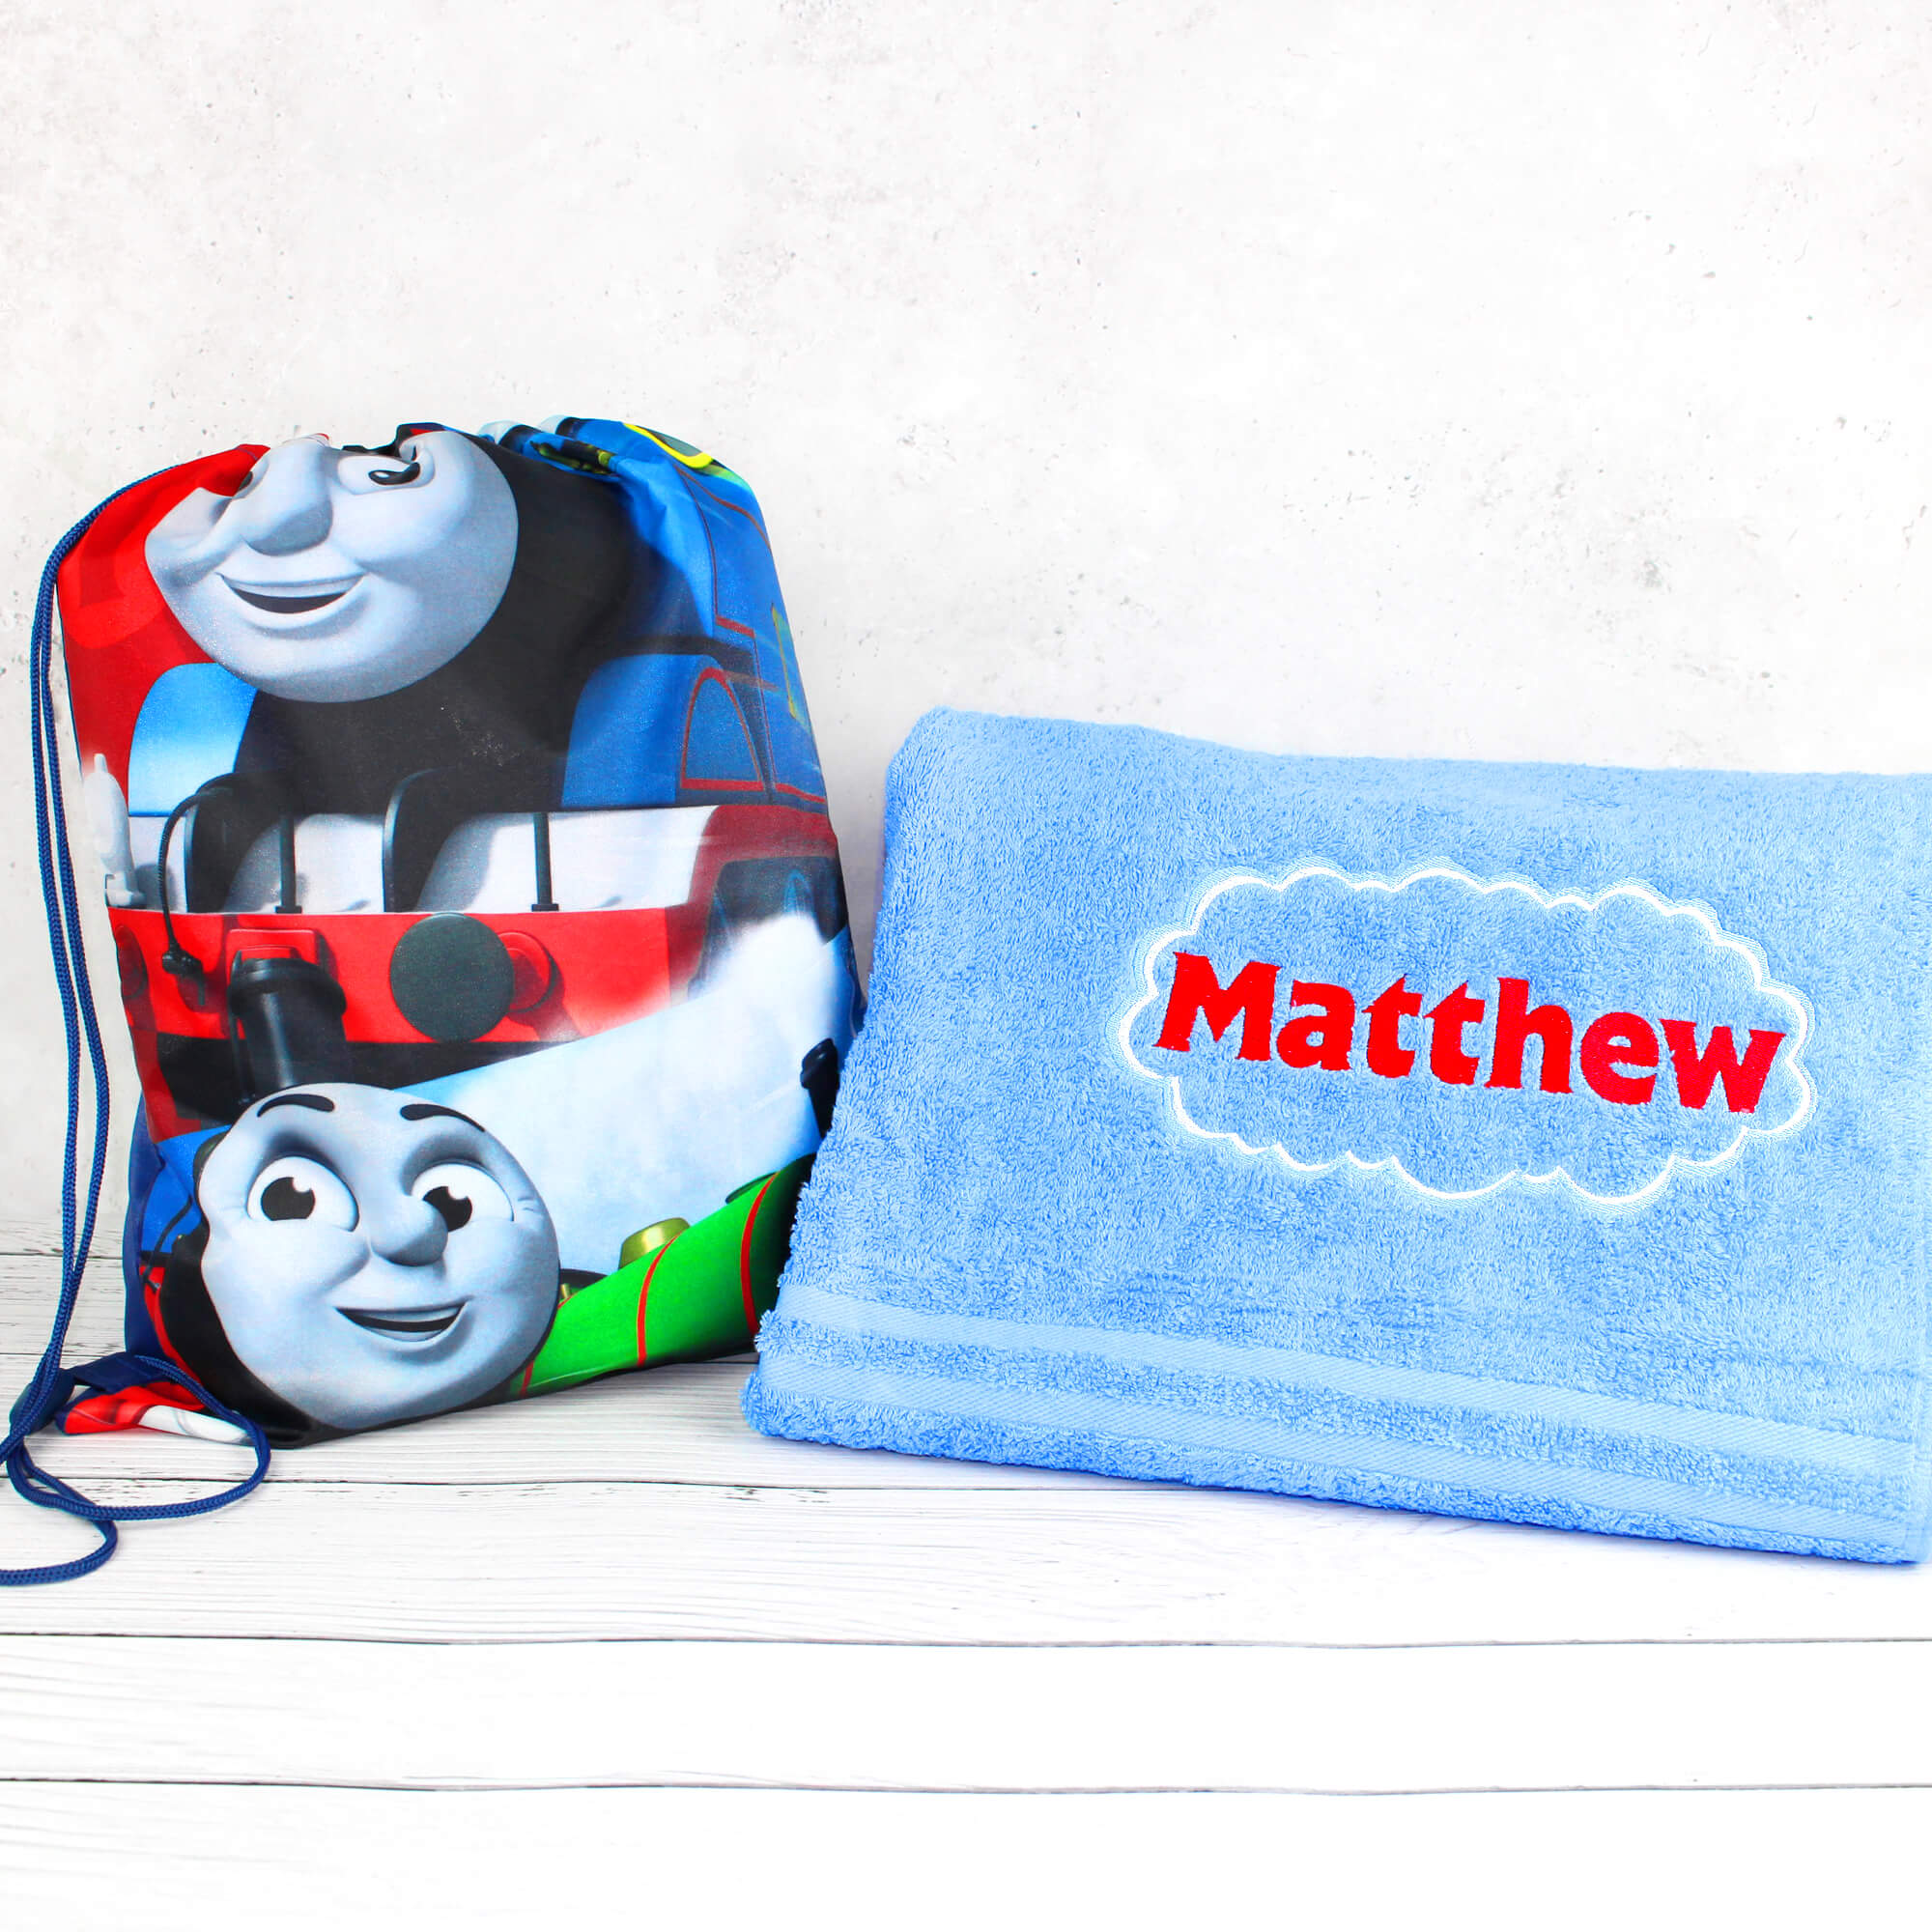 Thomas and Friends bag by humanmuck on DeviantArt